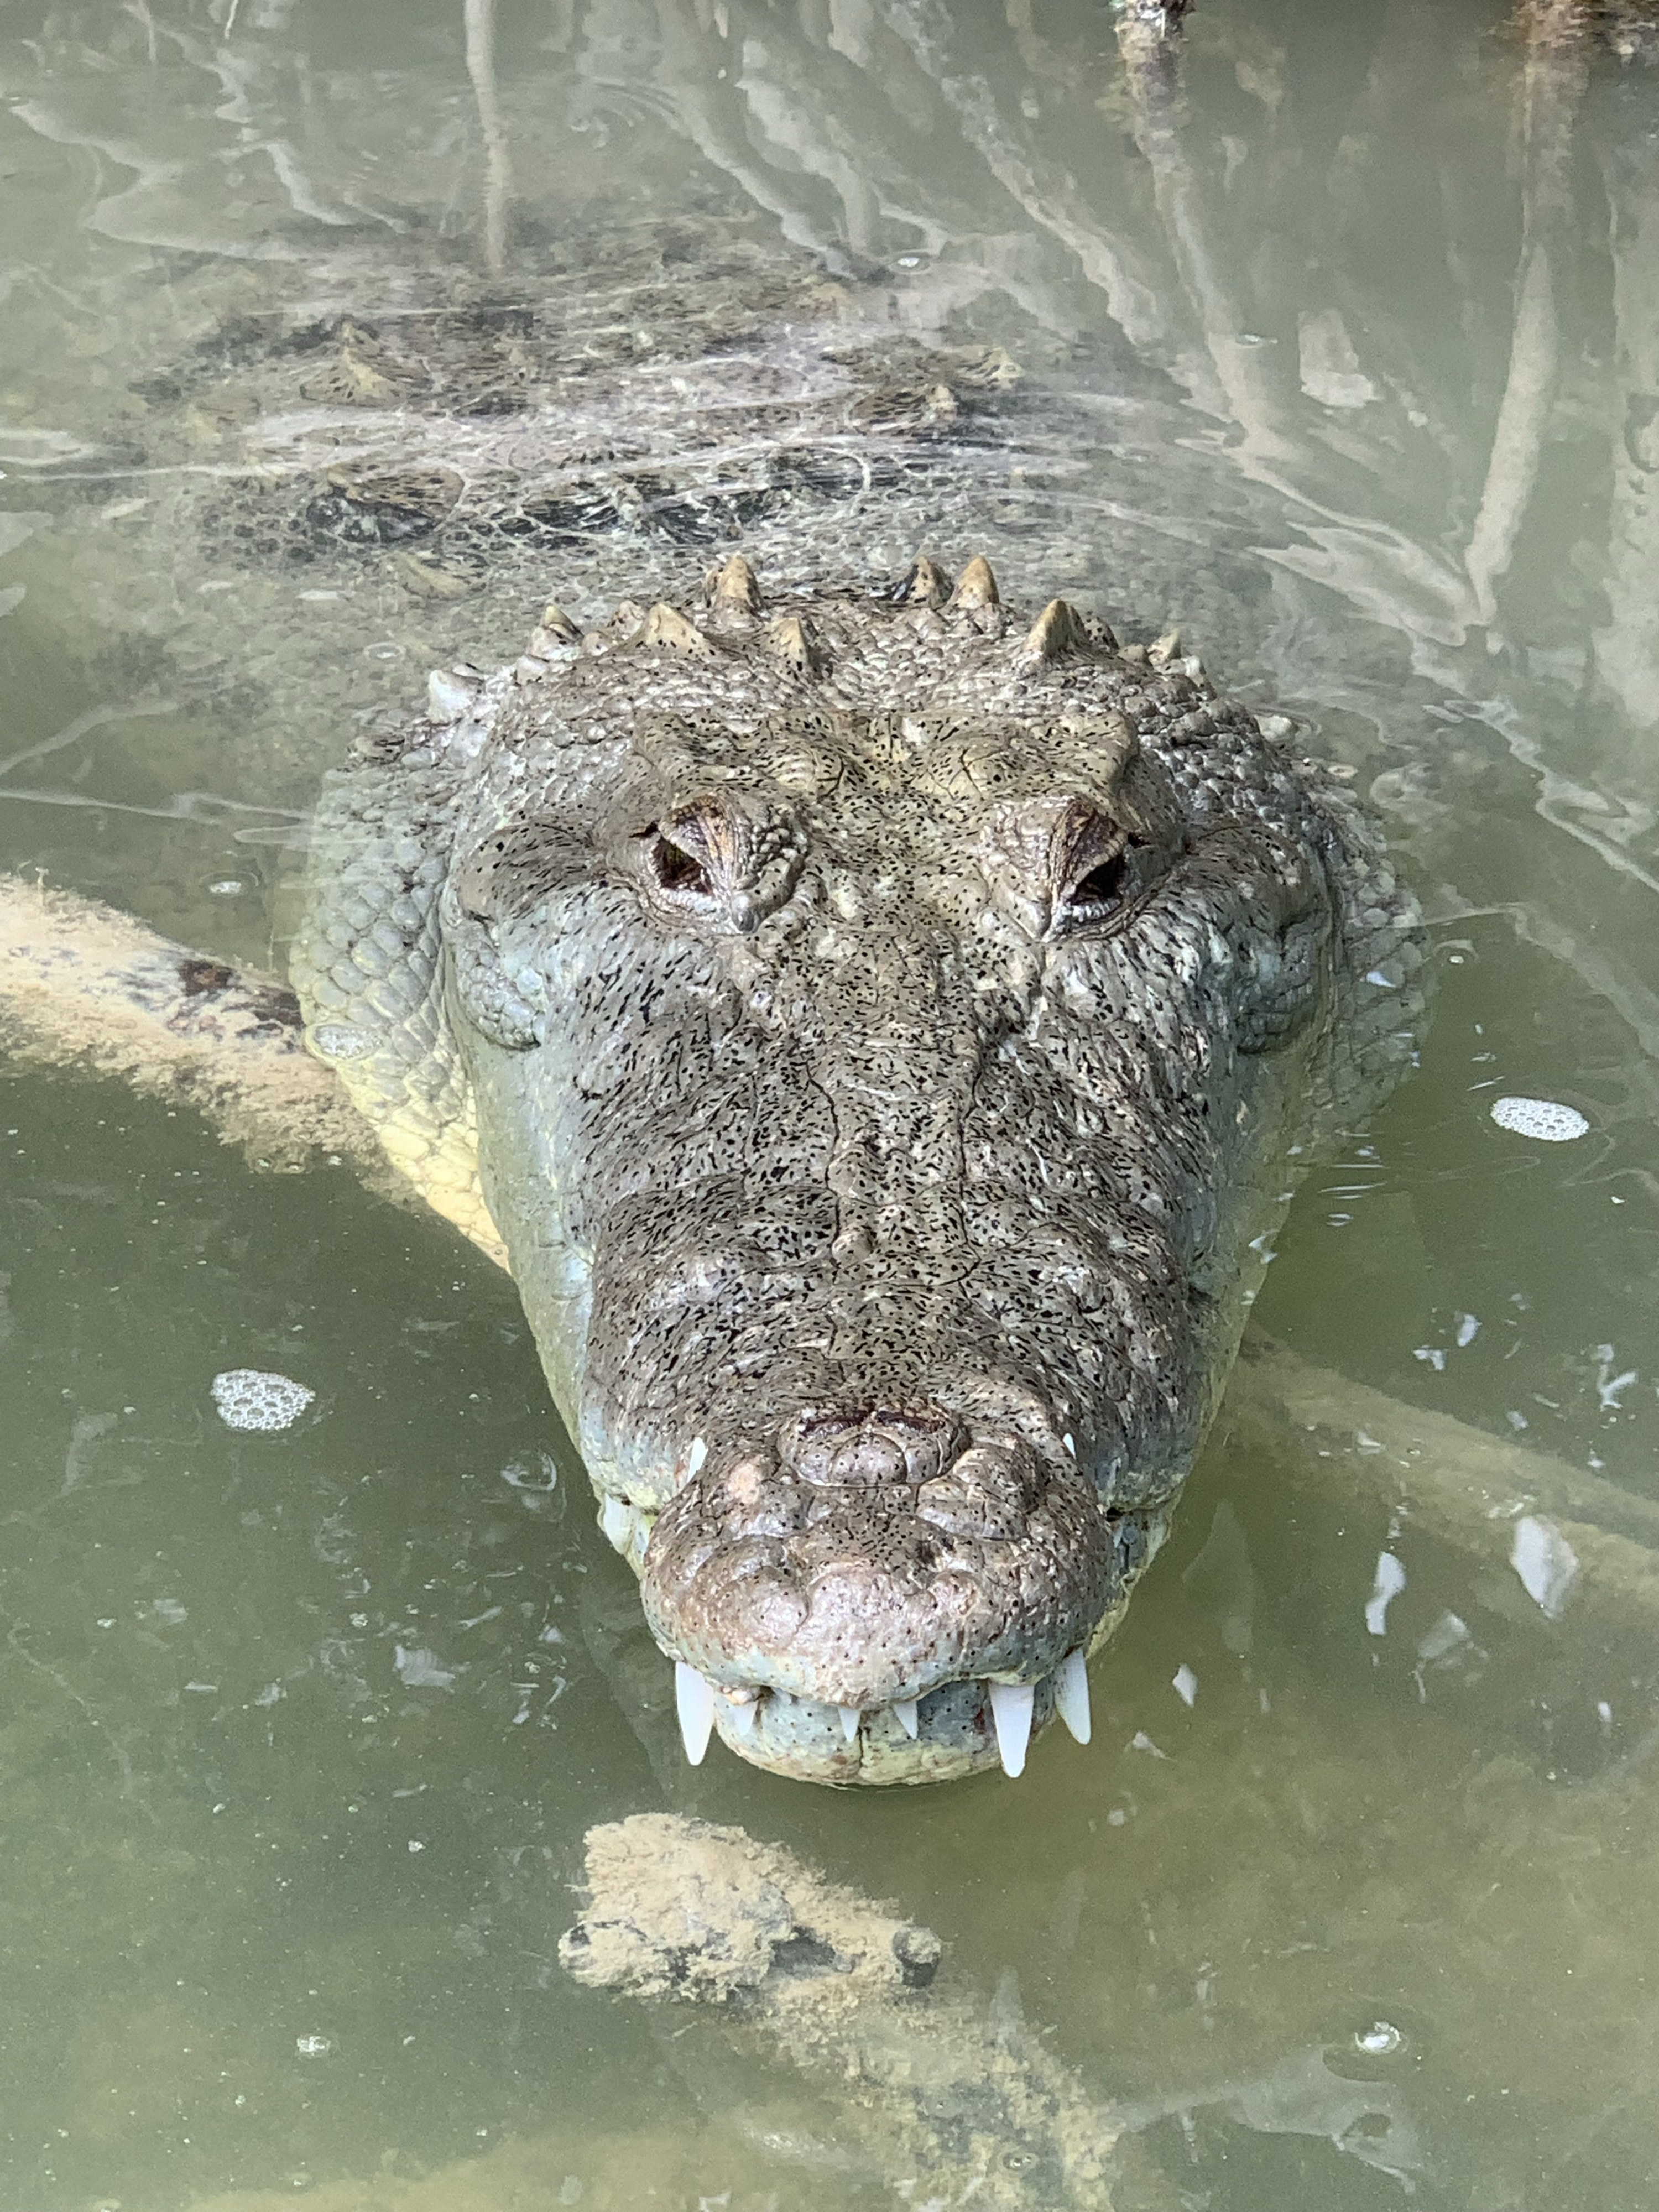 An image of an alligator&#x27;s head popping above water, resting on a log